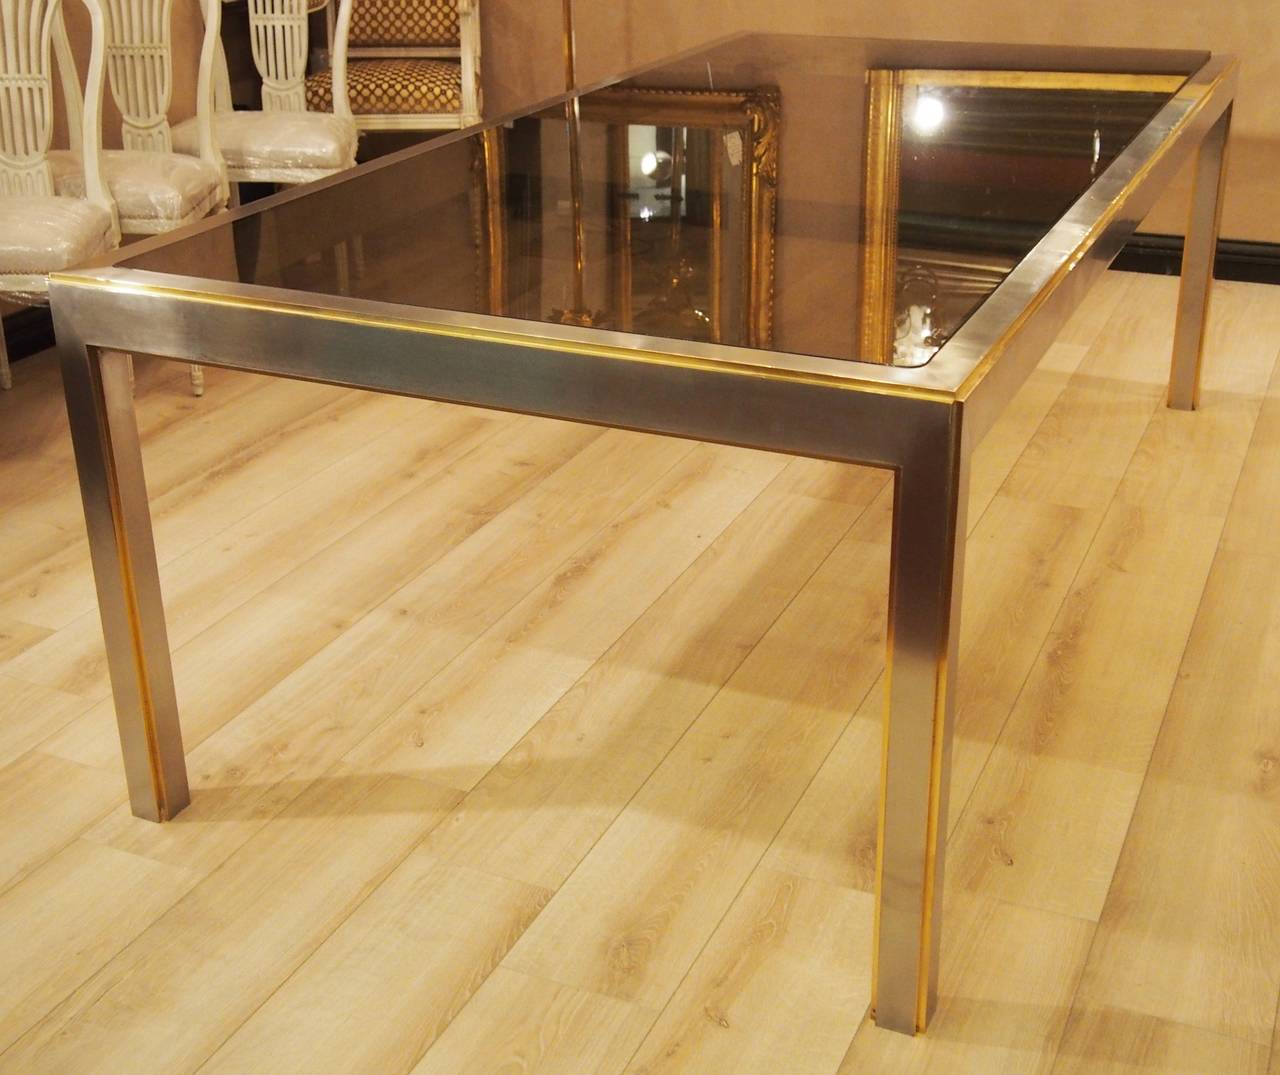 Large dining table, 
unique model made by a French architect,
high quality stainless steel, some details gilded, smoke security glass top.
Marked Saint Gobain.